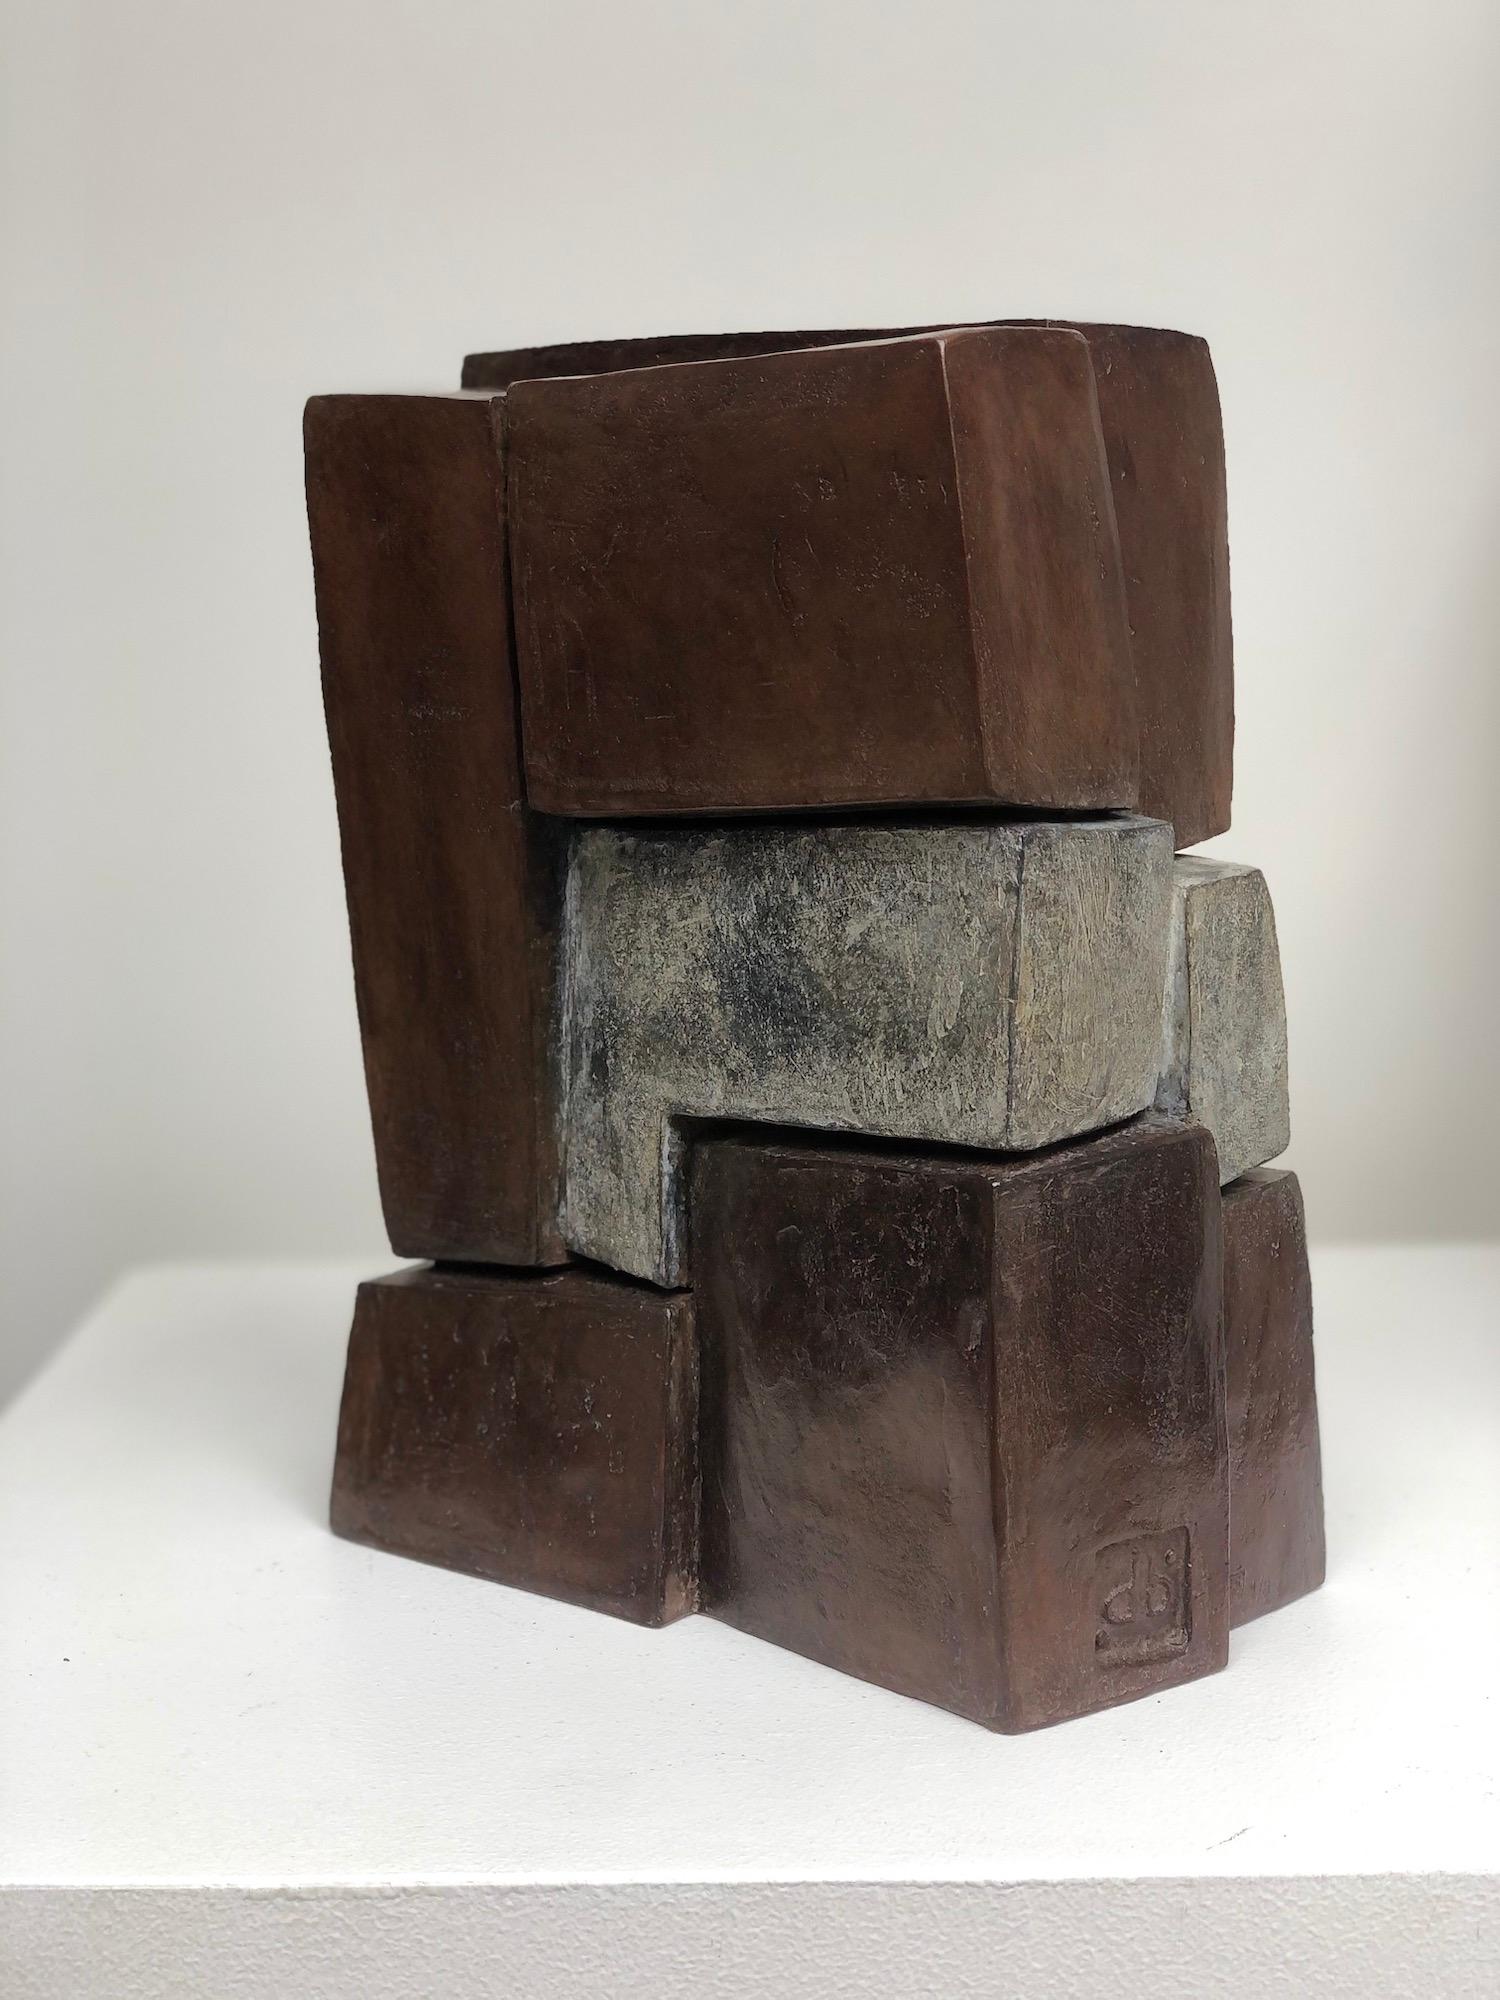 Unity II, is a bronze sculpture by French contemporary artist Delphine Brabant.  25 cm × 12 cm × 12 cm. Limited edition of 8 + 4 A.P.

Fascinated with the concept of construction, Delphine Brabant composes her abstract sculptures like an architect,